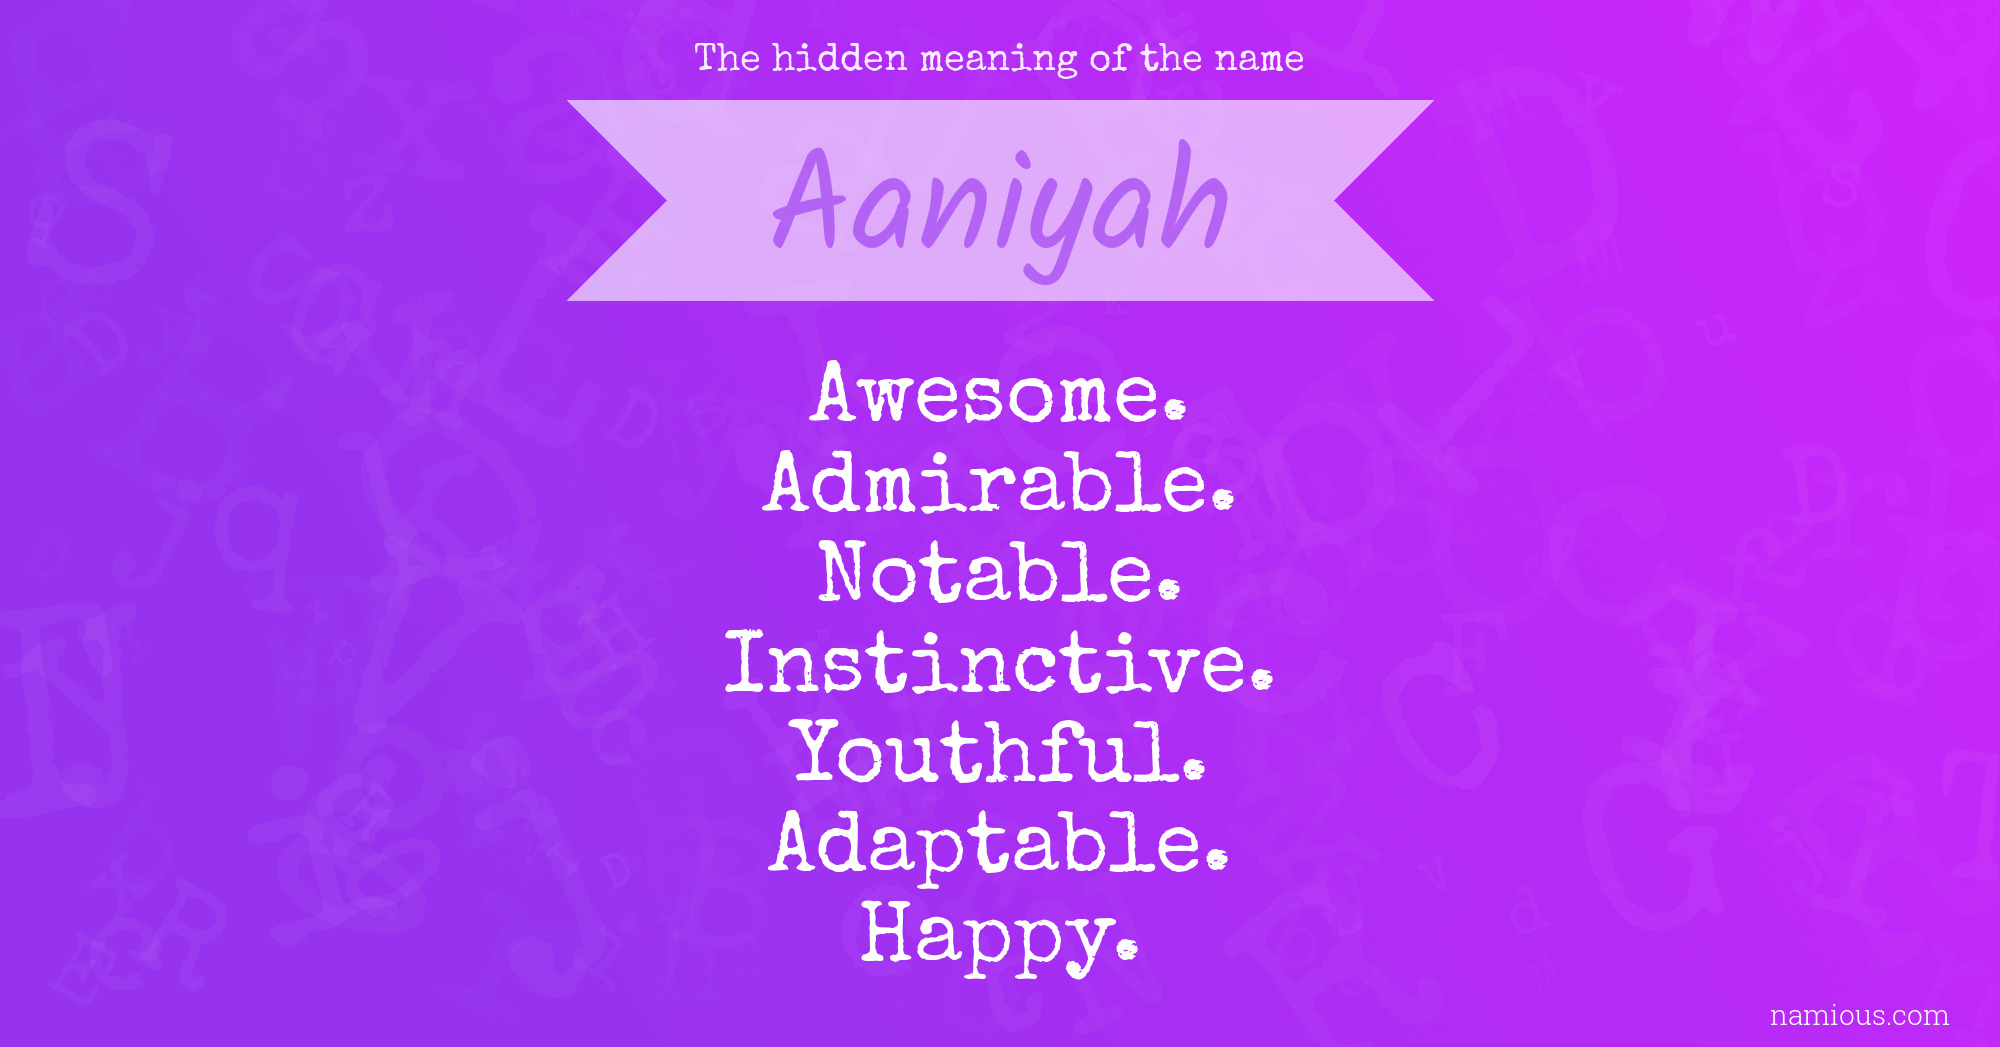 The hidden meaning of the name Aaniyah